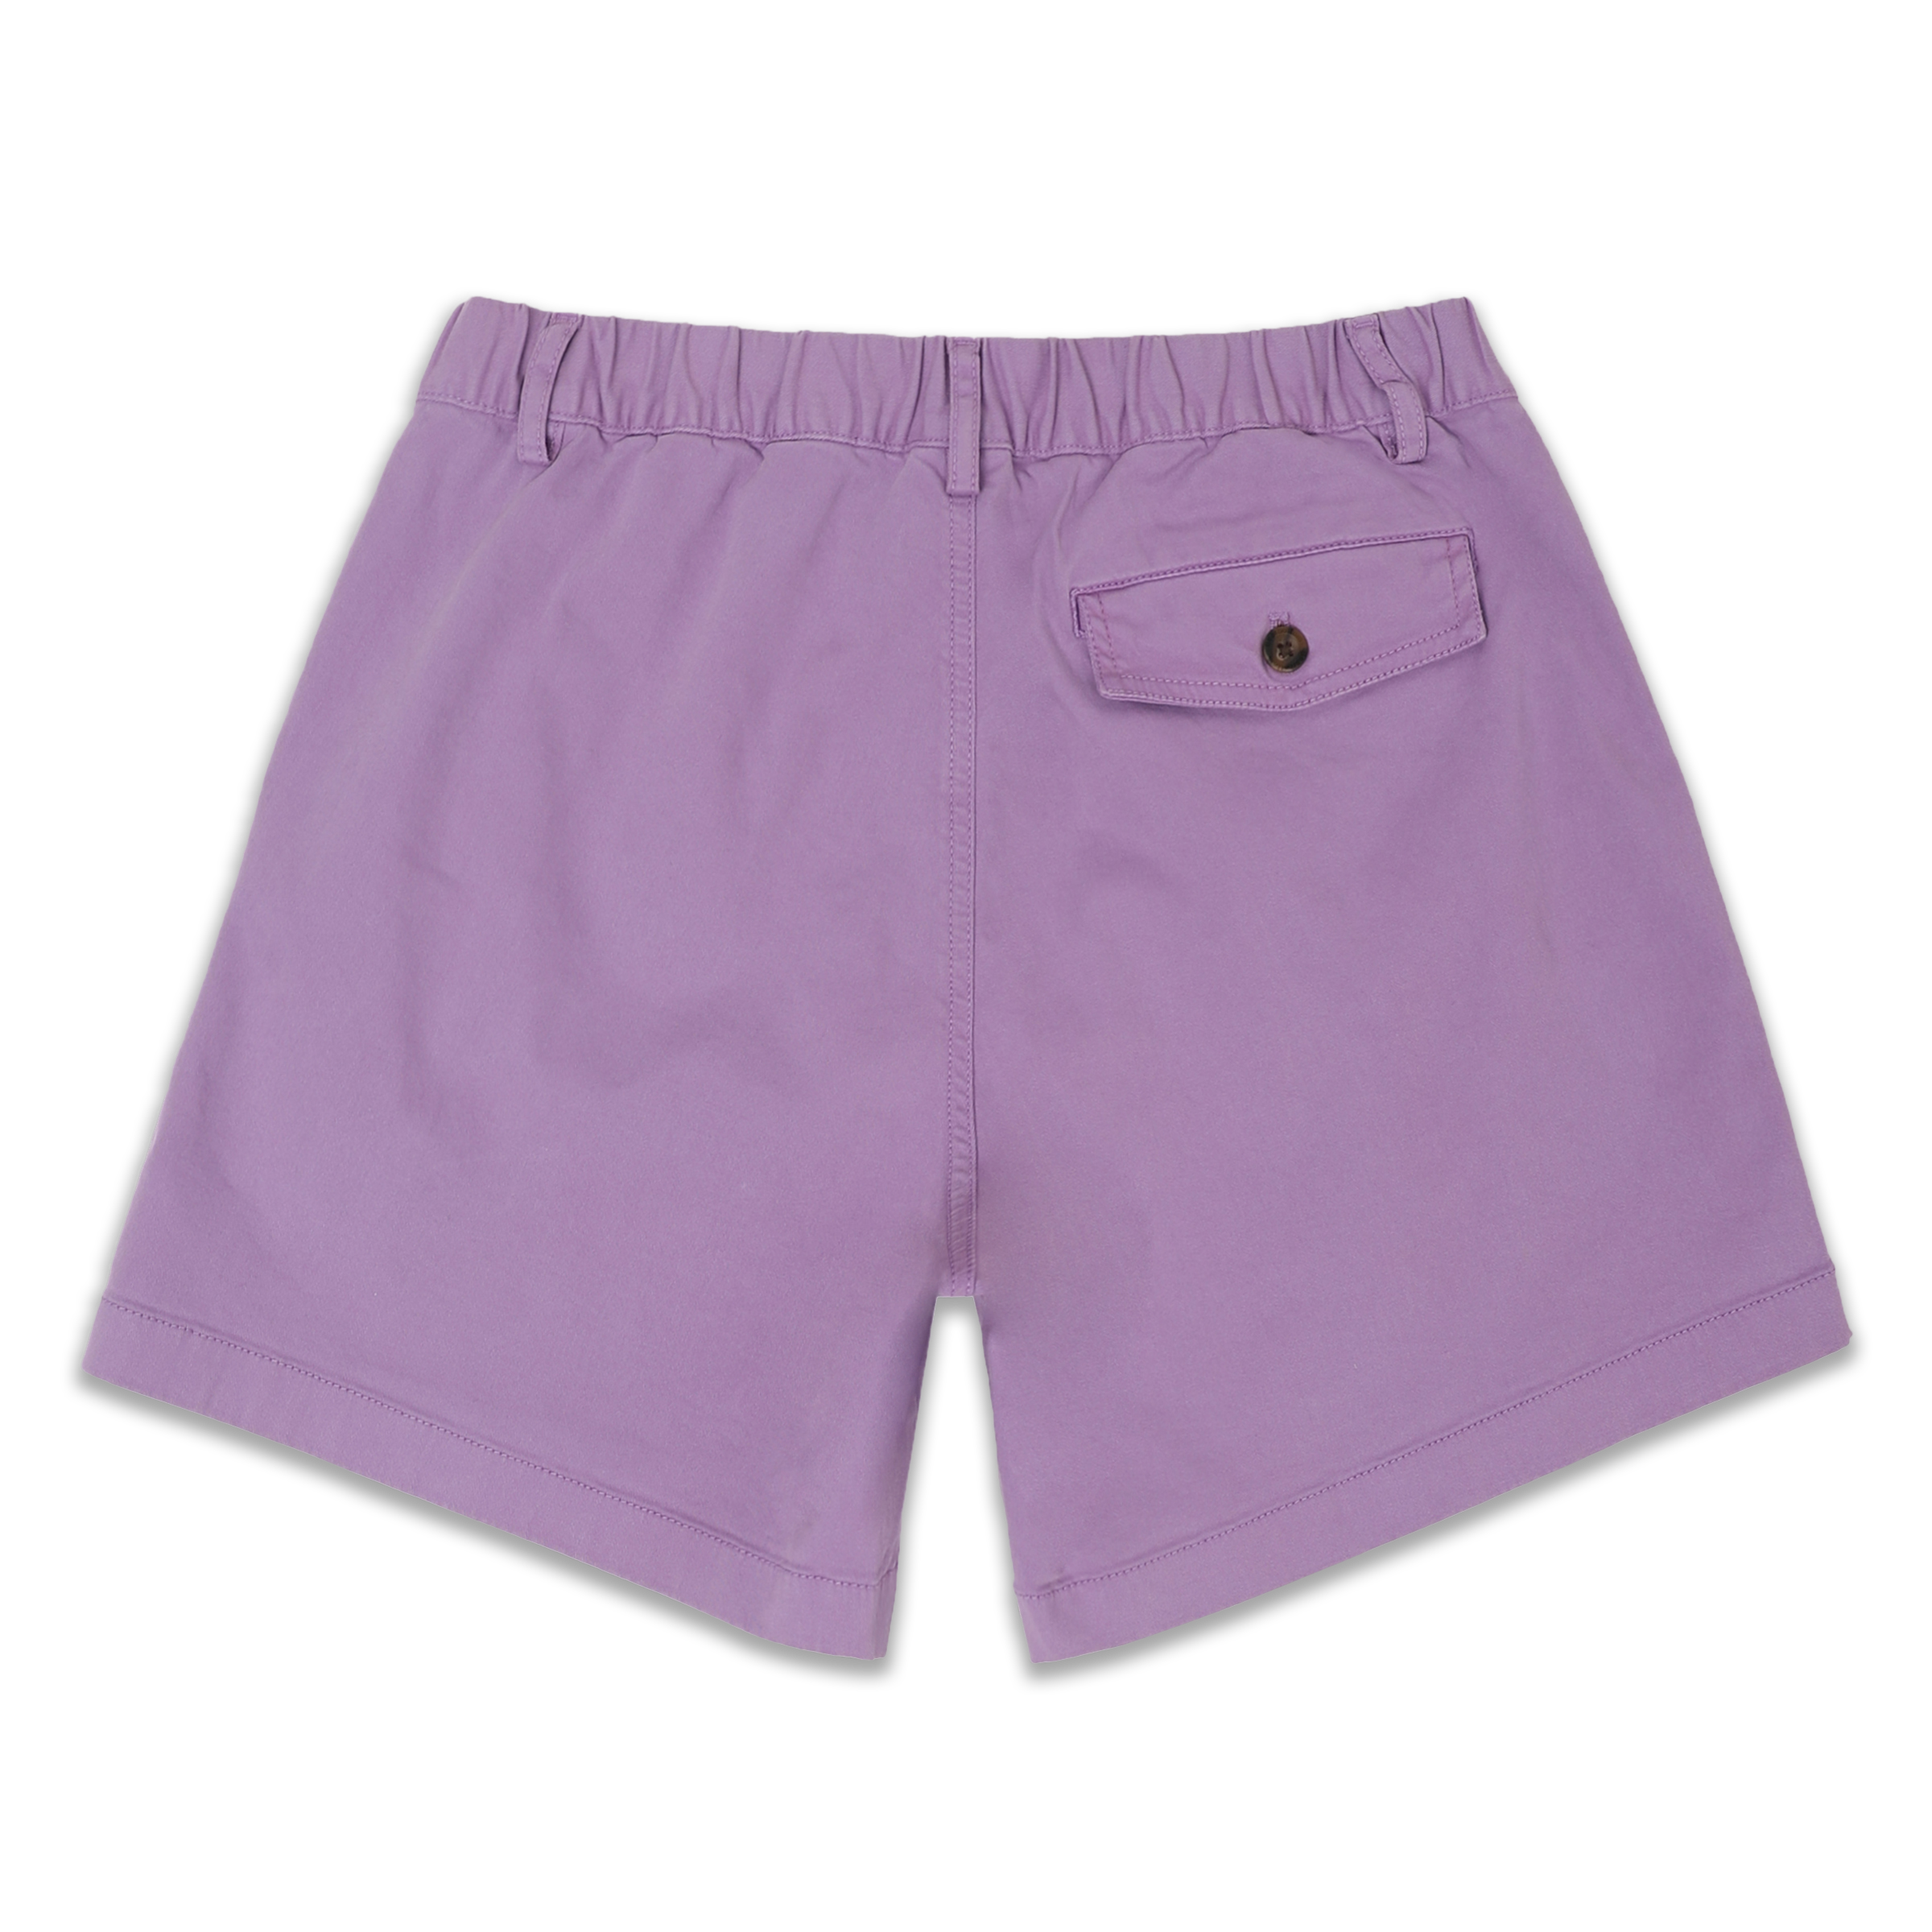 Stretch Short 5.5" Lilac back with elastic waistband, belt loops, and right buttoned back pocket